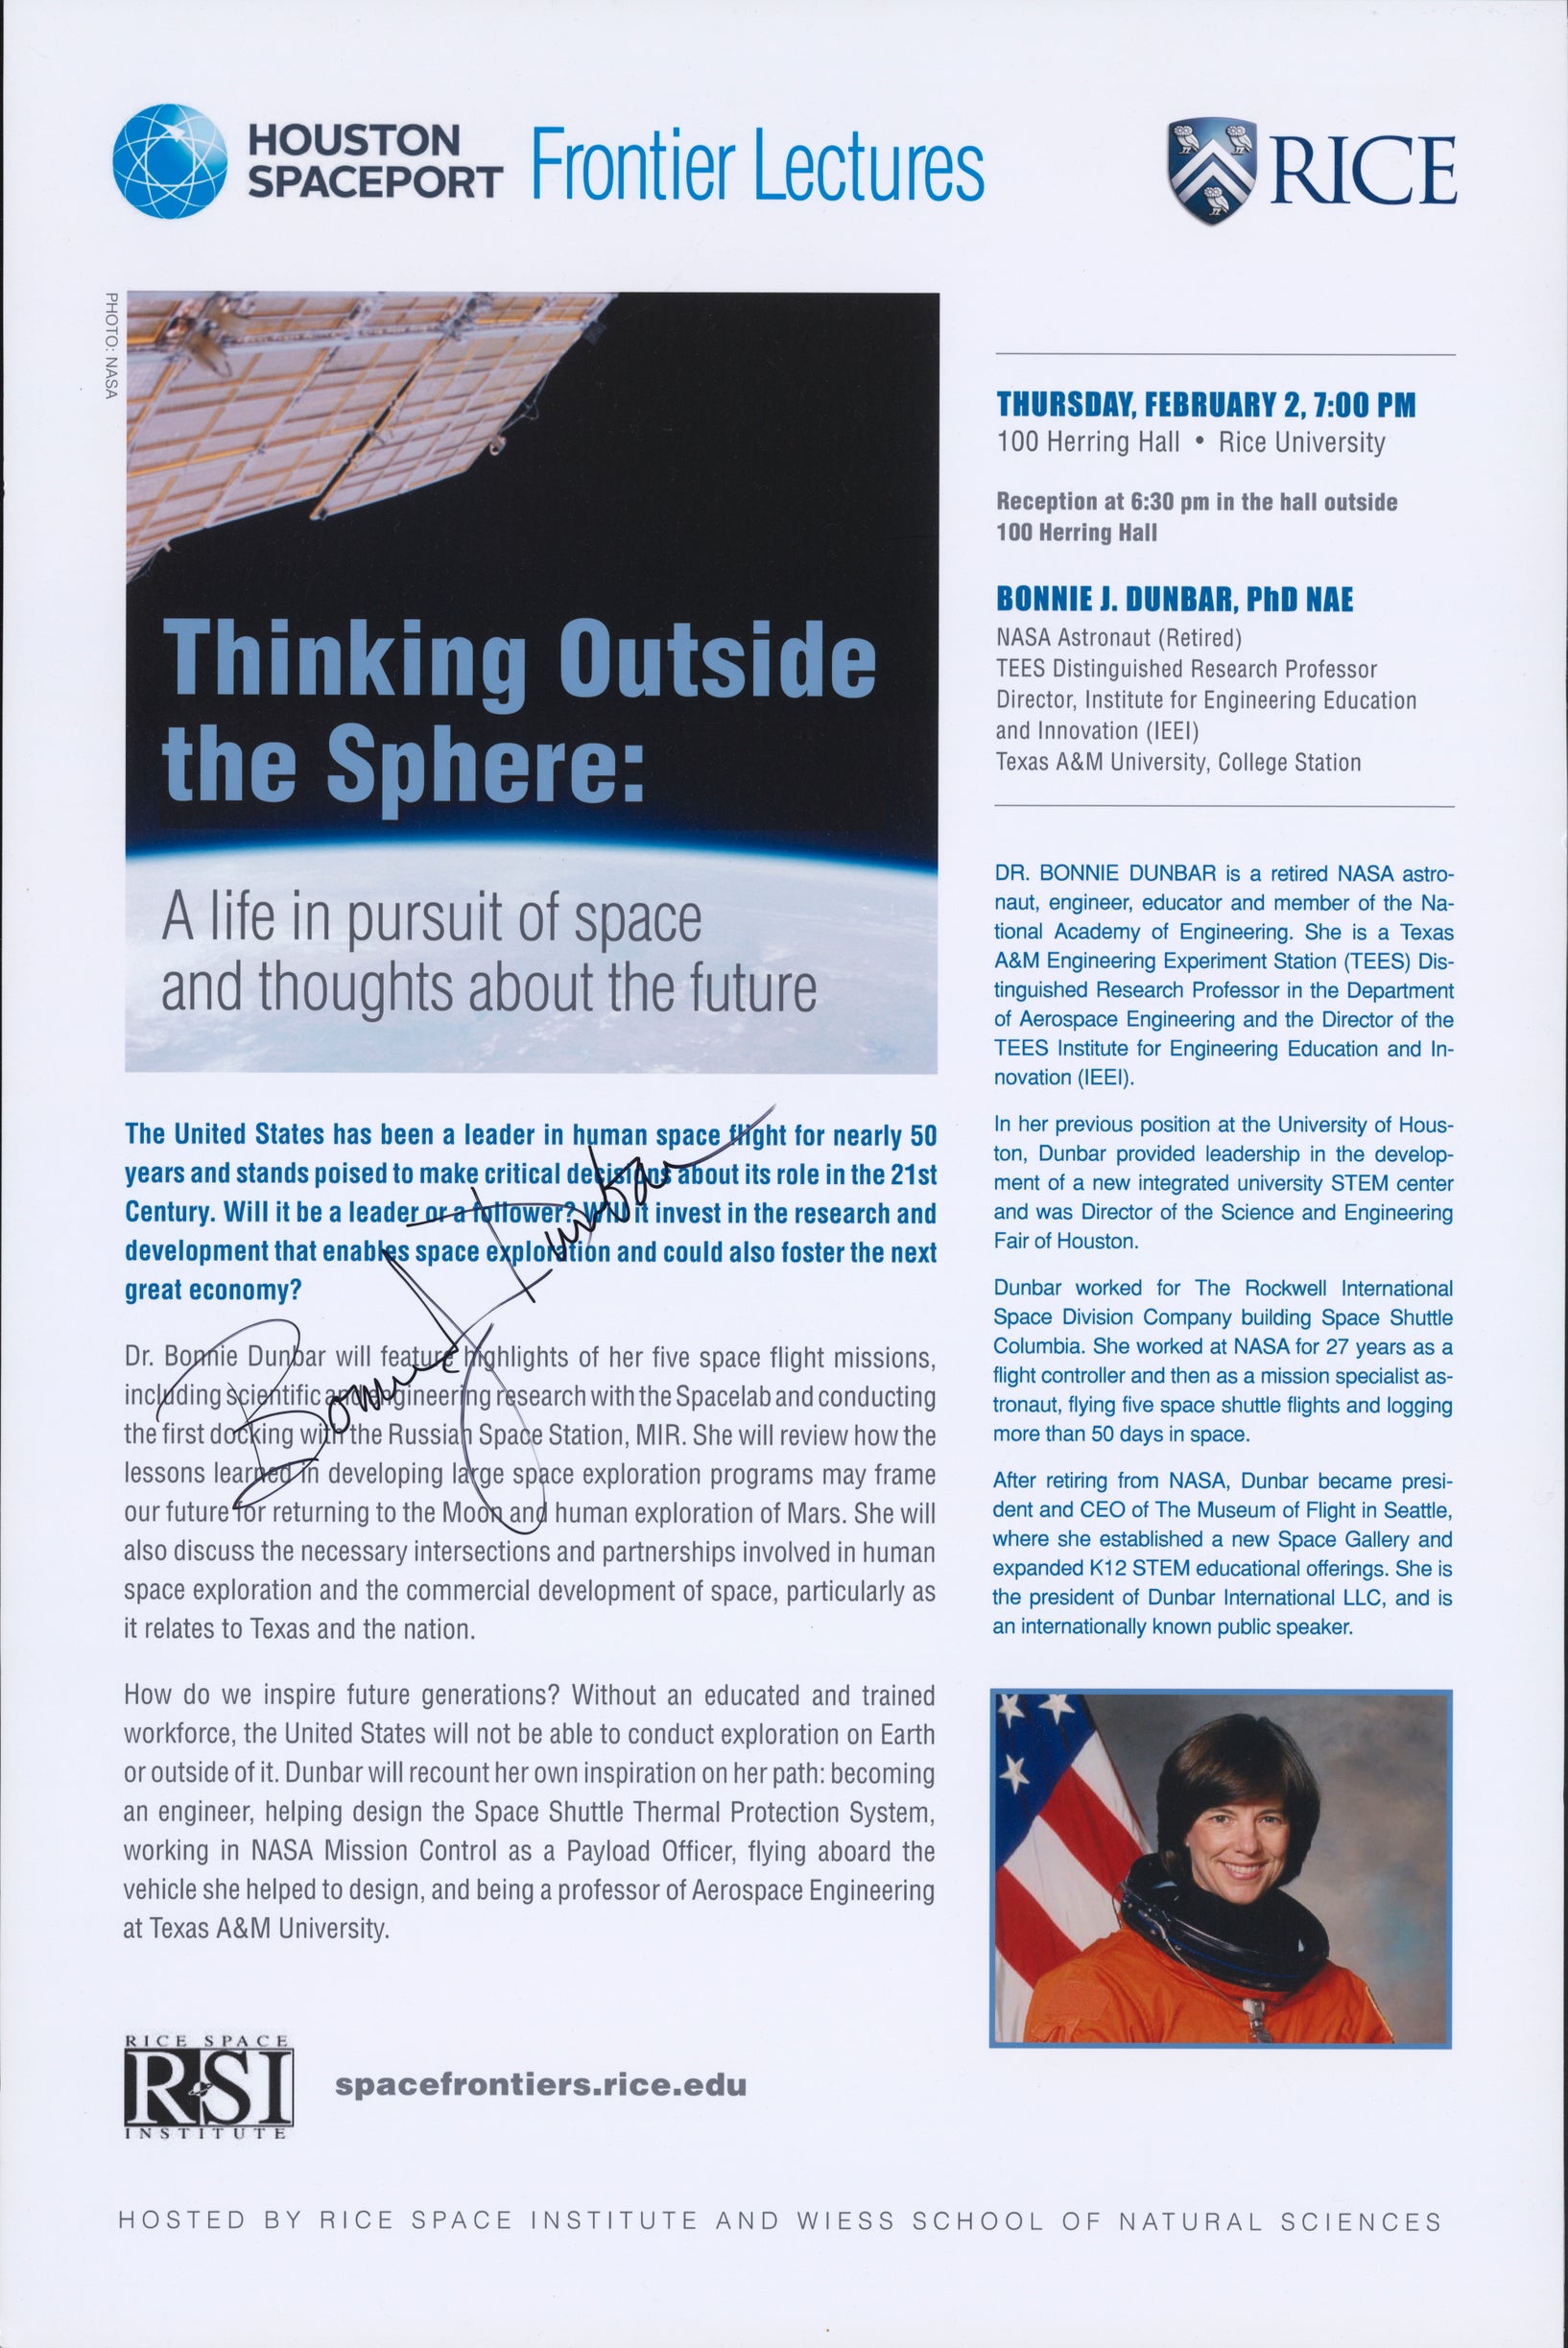 Poster of Thinking Outside the Sphere: A life in pursuit of Space and Thoughts about the Future by Bonnie Dunbar